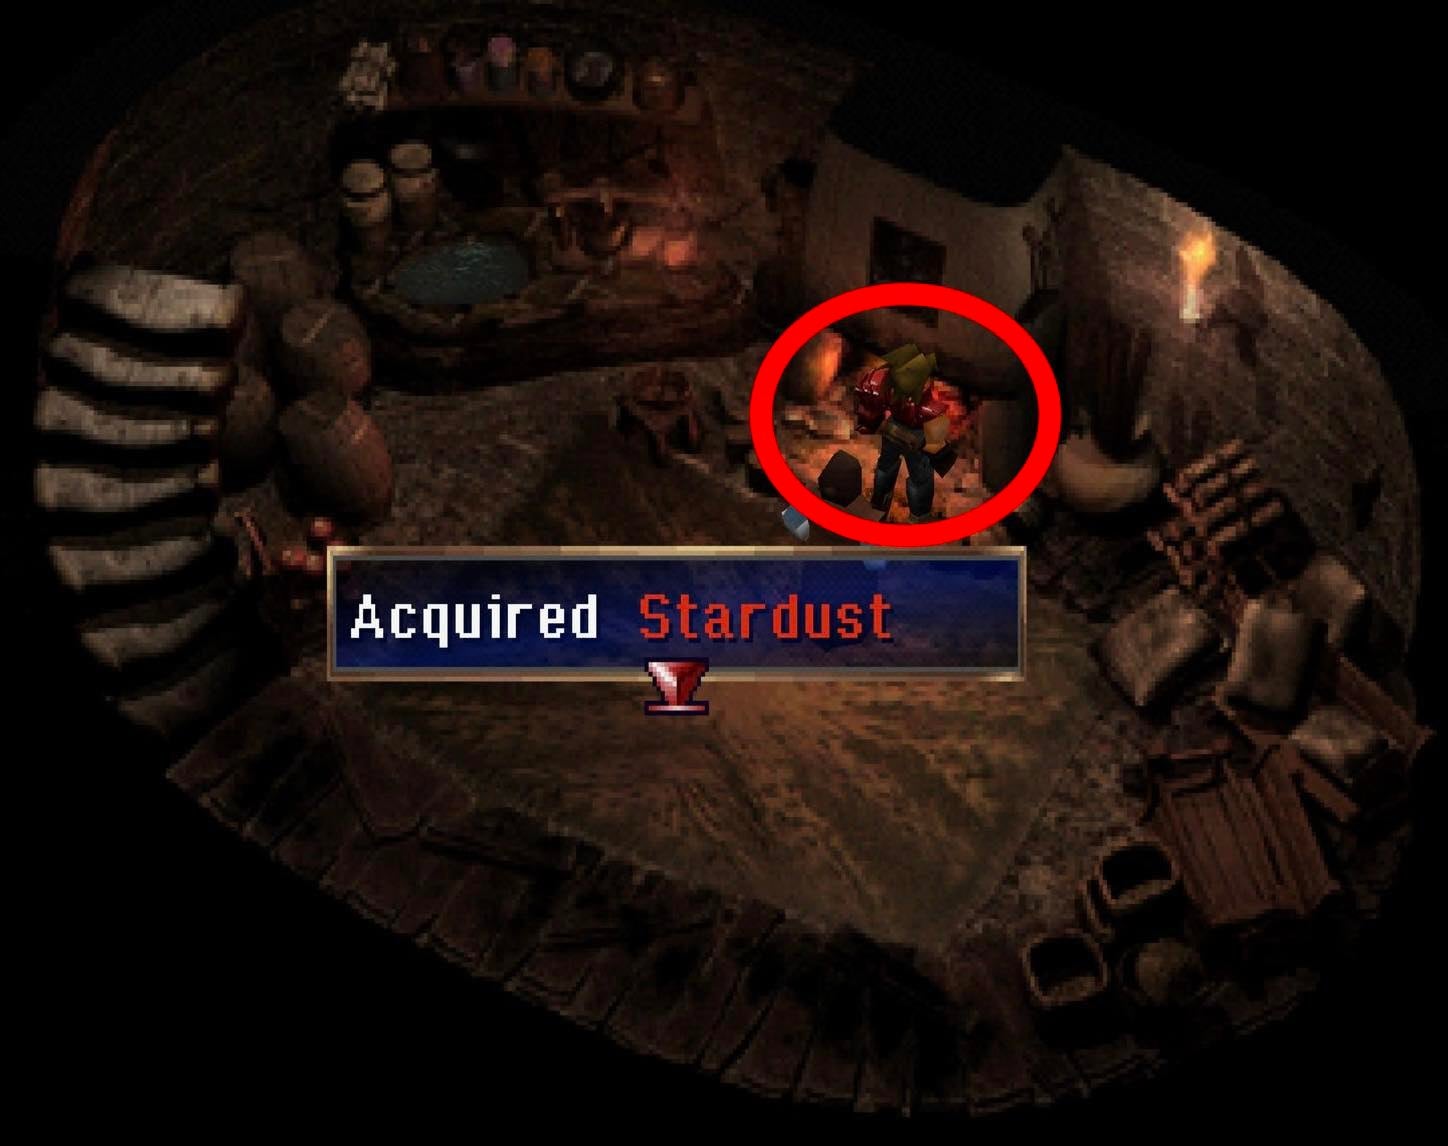 Second Stardust location in Hoax.